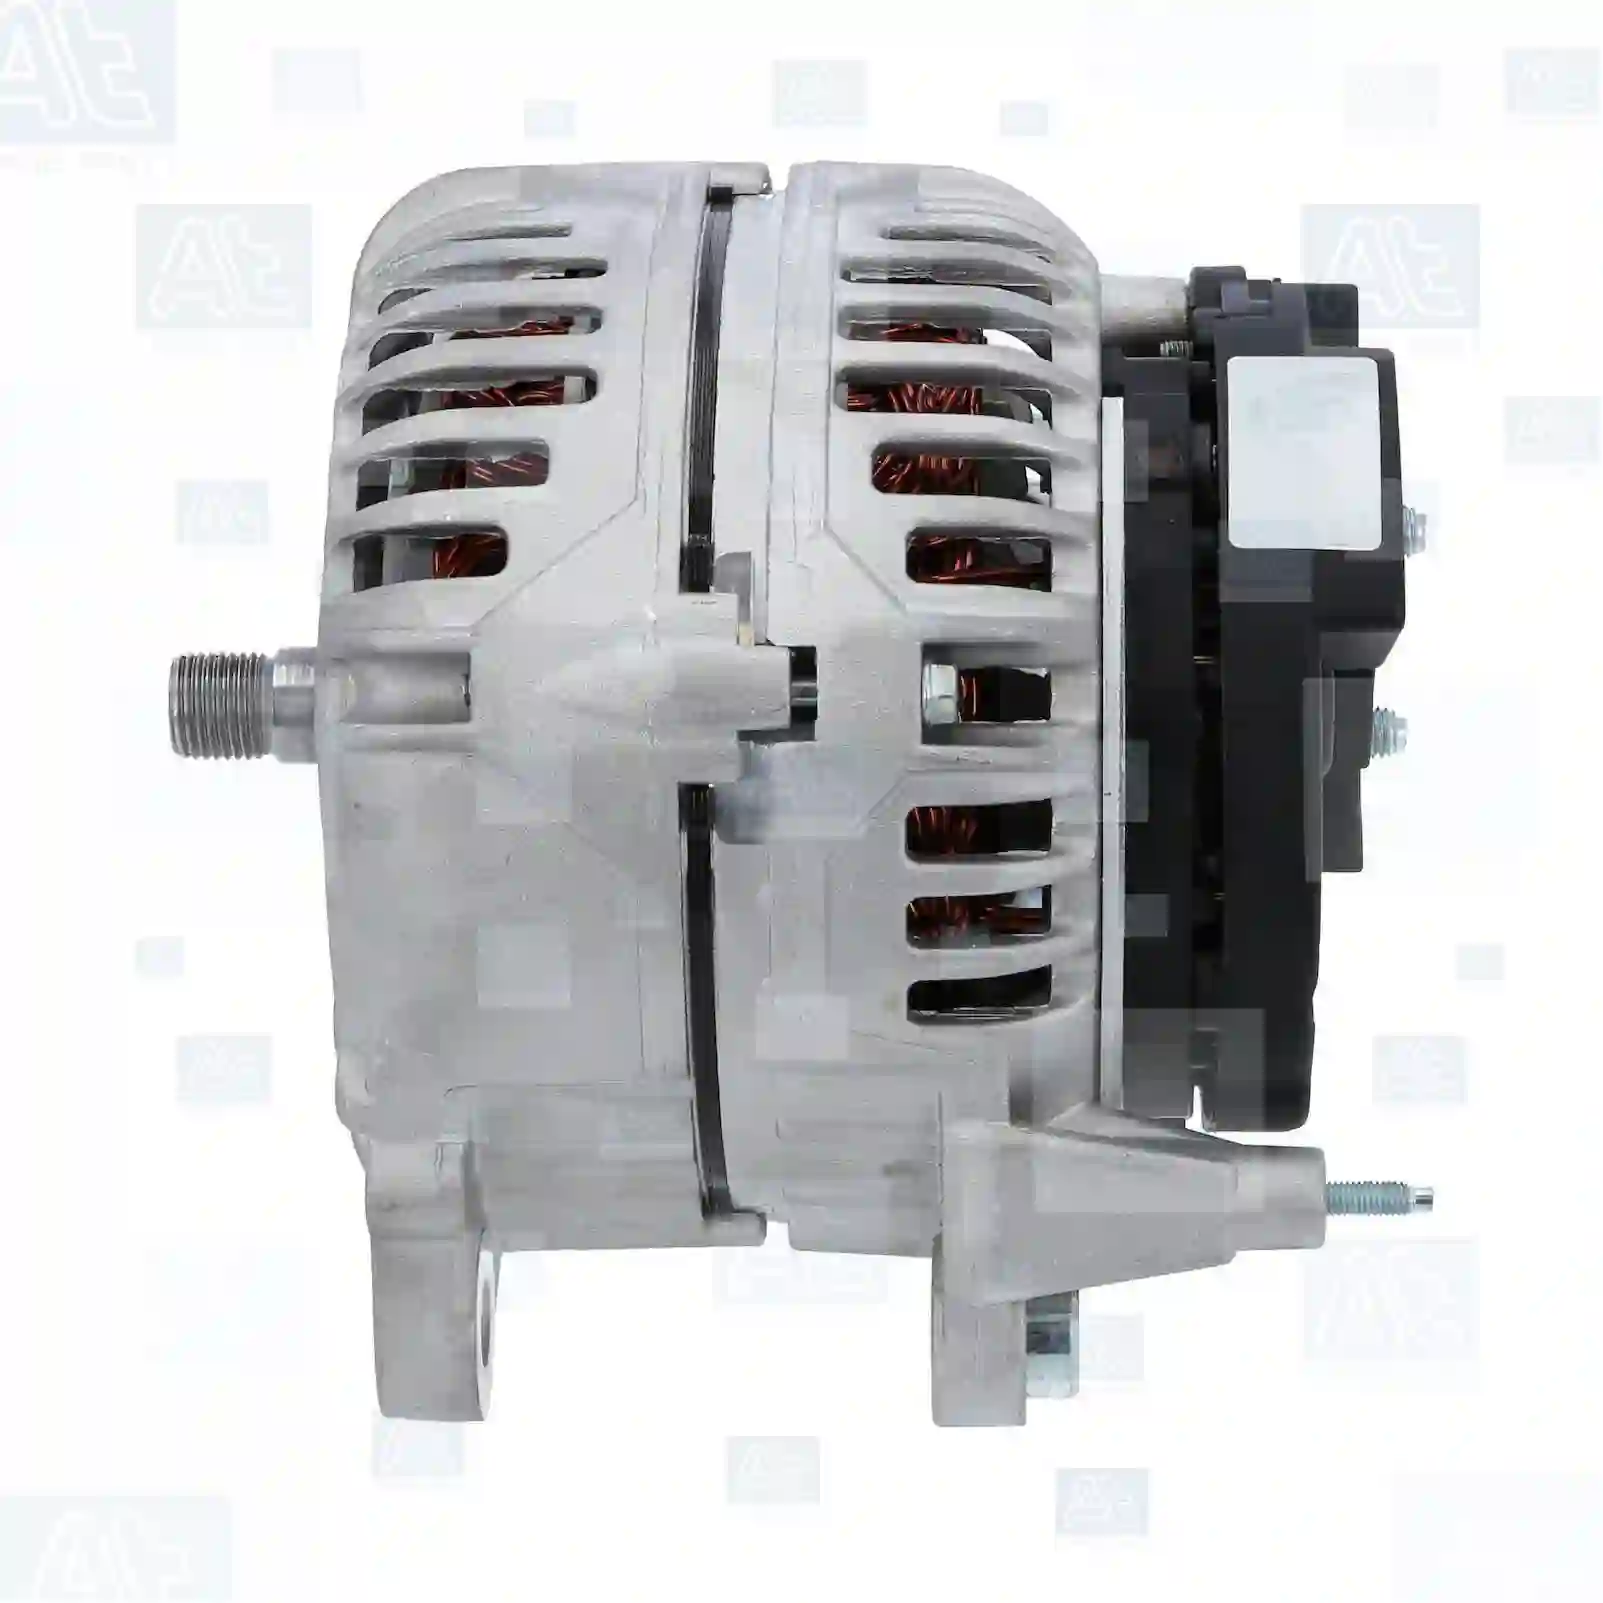 Alternator, without pulley, 77711331, 03L903023F, 06F903023A, 06F903023C, 06F903023F, 06F903023H, 07K903023A, 07K903025A, 304183, 03L903023F, 06F903023C, 06F903023J, 07K903025A, 03L903023F, 06F903023A, 06F903023C, 06F903023F, 06F903023H, 06F903023J, 07K903025A, 38522326F, 03I903023F, 03L903023FX, 06F903023A, 06F903023AX, 06F903023C, 06F903023CX, 06F903023F, 06F903023FX, 06F903023H, 06F903023HX, 06F903023I, 06F903023J, 07K903023A, 07K903025A ||  77711331 At Spare Part | Engine, Accelerator Pedal, Camshaft, Connecting Rod, Crankcase, Crankshaft, Cylinder Head, Engine Suspension Mountings, Exhaust Manifold, Exhaust Gas Recirculation, Filter Kits, Flywheel Housing, General Overhaul Kits, Engine, Intake Manifold, Oil Cleaner, Oil Cooler, Oil Filter, Oil Pump, Oil Sump, Piston & Liner, Sensor & Switch, Timing Case, Turbocharger, Cooling System, Belt Tensioner, Coolant Filter, Coolant Pipe, Corrosion Prevention Agent, Drive, Expansion Tank, Fan, Intercooler, Monitors & Gauges, Radiator, Thermostat, V-Belt / Timing belt, Water Pump, Fuel System, Electronical Injector Unit, Feed Pump, Fuel Filter, cpl., Fuel Gauge Sender,  Fuel Line, Fuel Pump, Fuel Tank, Injection Line Kit, Injection Pump, Exhaust System, Clutch & Pedal, Gearbox, Propeller Shaft, Axles, Brake System, Hubs & Wheels, Suspension, Leaf Spring, Universal Parts / Accessories, Steering, Electrical System, Cabin Alternator, without pulley, 77711331, 03L903023F, 06F903023A, 06F903023C, 06F903023F, 06F903023H, 07K903023A, 07K903025A, 304183, 03L903023F, 06F903023C, 06F903023J, 07K903025A, 03L903023F, 06F903023A, 06F903023C, 06F903023F, 06F903023H, 06F903023J, 07K903025A, 38522326F, 03I903023F, 03L903023FX, 06F903023A, 06F903023AX, 06F903023C, 06F903023CX, 06F903023F, 06F903023FX, 06F903023H, 06F903023HX, 06F903023I, 06F903023J, 07K903023A, 07K903025A ||  77711331 At Spare Part | Engine, Accelerator Pedal, Camshaft, Connecting Rod, Crankcase, Crankshaft, Cylinder Head, Engine Suspension Mountings, Exhaust Manifold, Exhaust Gas Recirculation, Filter Kits, Flywheel Housing, General Overhaul Kits, Engine, Intake Manifold, Oil Cleaner, Oil Cooler, Oil Filter, Oil Pump, Oil Sump, Piston & Liner, Sensor & Switch, Timing Case, Turbocharger, Cooling System, Belt Tensioner, Coolant Filter, Coolant Pipe, Corrosion Prevention Agent, Drive, Expansion Tank, Fan, Intercooler, Monitors & Gauges, Radiator, Thermostat, V-Belt / Timing belt, Water Pump, Fuel System, Electronical Injector Unit, Feed Pump, Fuel Filter, cpl., Fuel Gauge Sender,  Fuel Line, Fuel Pump, Fuel Tank, Injection Line Kit, Injection Pump, Exhaust System, Clutch & Pedal, Gearbox, Propeller Shaft, Axles, Brake System, Hubs & Wheels, Suspension, Leaf Spring, Universal Parts / Accessories, Steering, Electrical System, Cabin